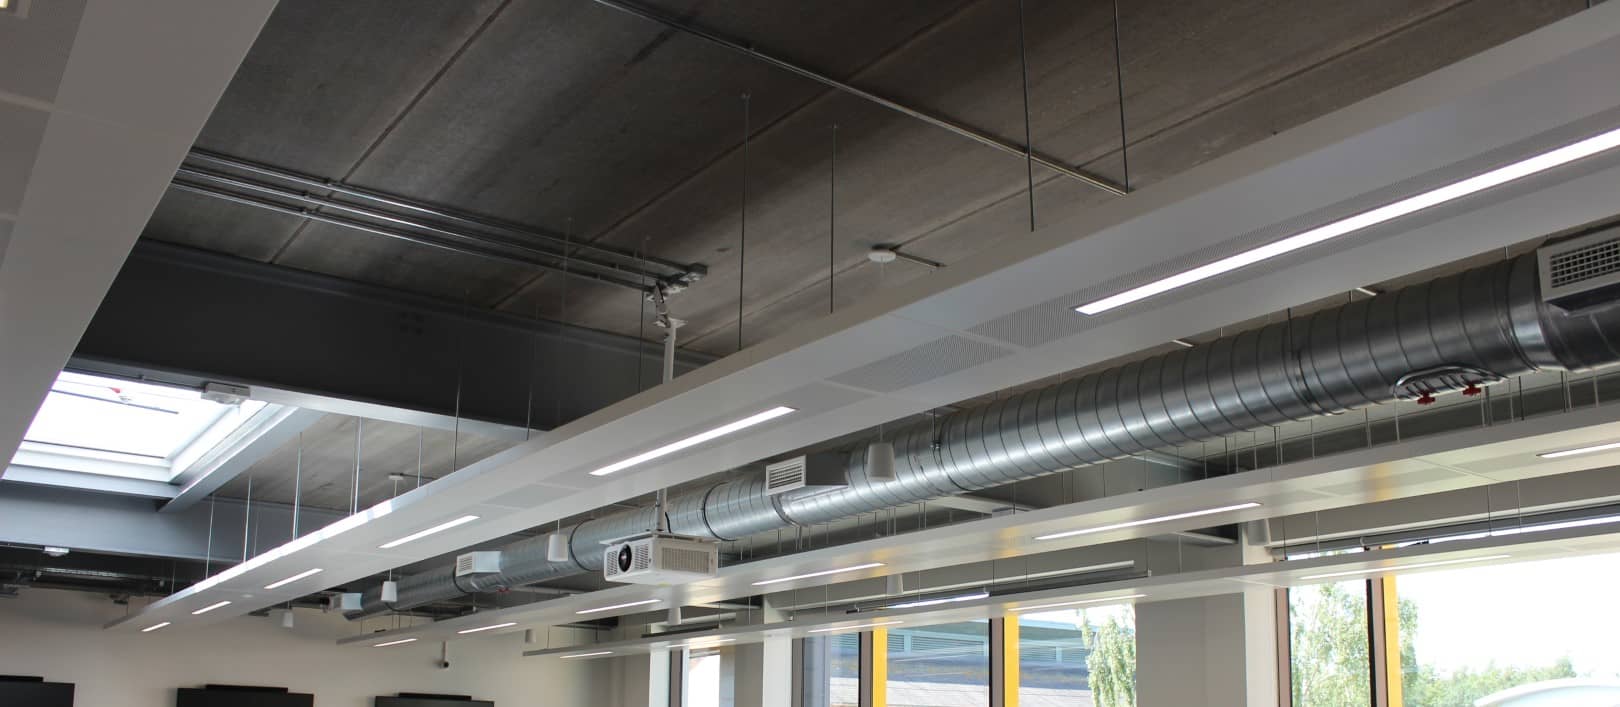 An image showing Frenger's® Multi-Service Radiant Heating Panels inside the NTU Engineering building